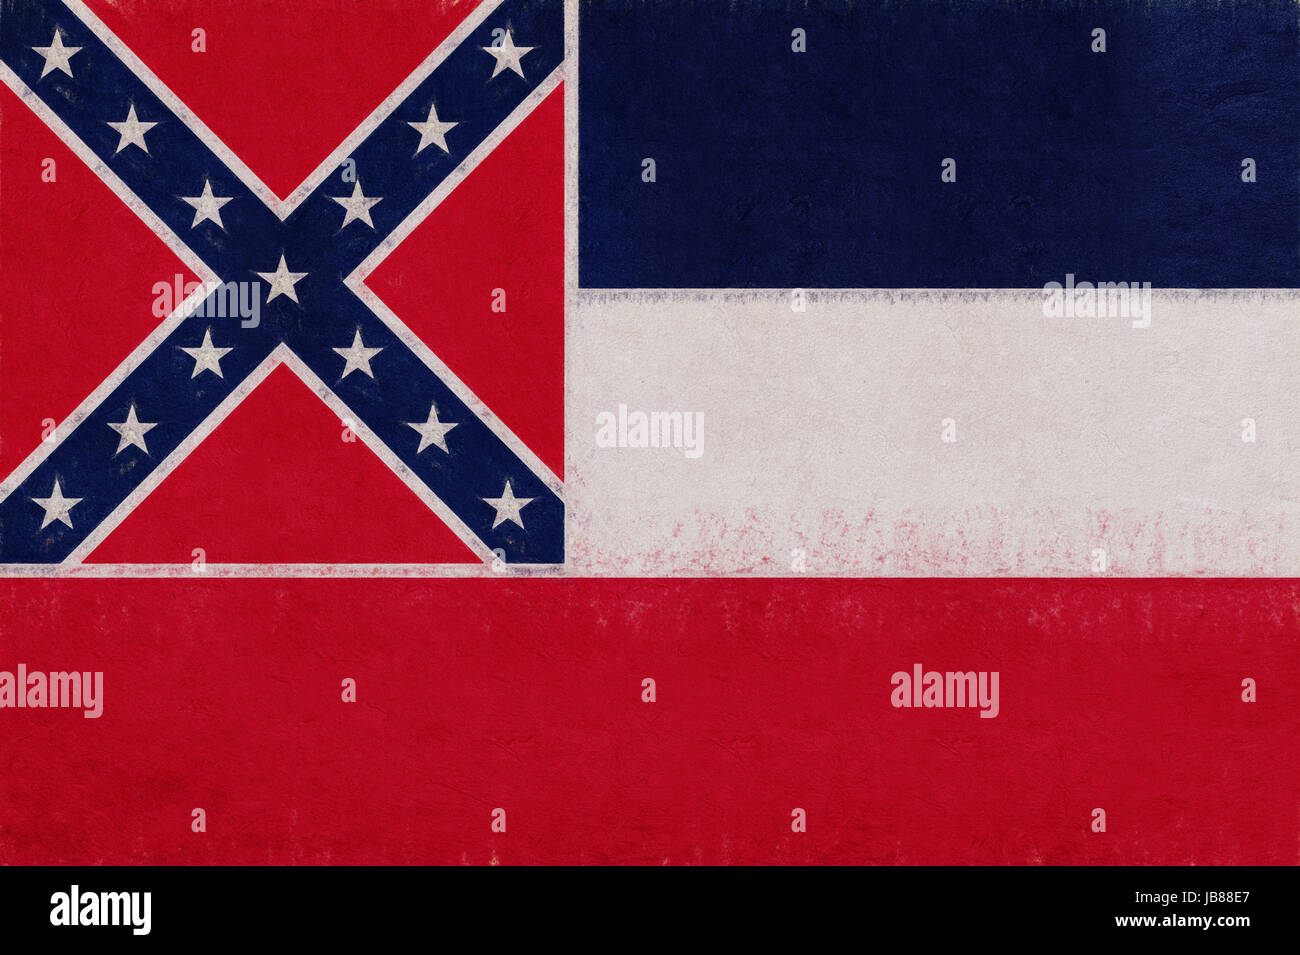 Illustration of the flag of Mississippi state in America with a grunge look. Stock Photo